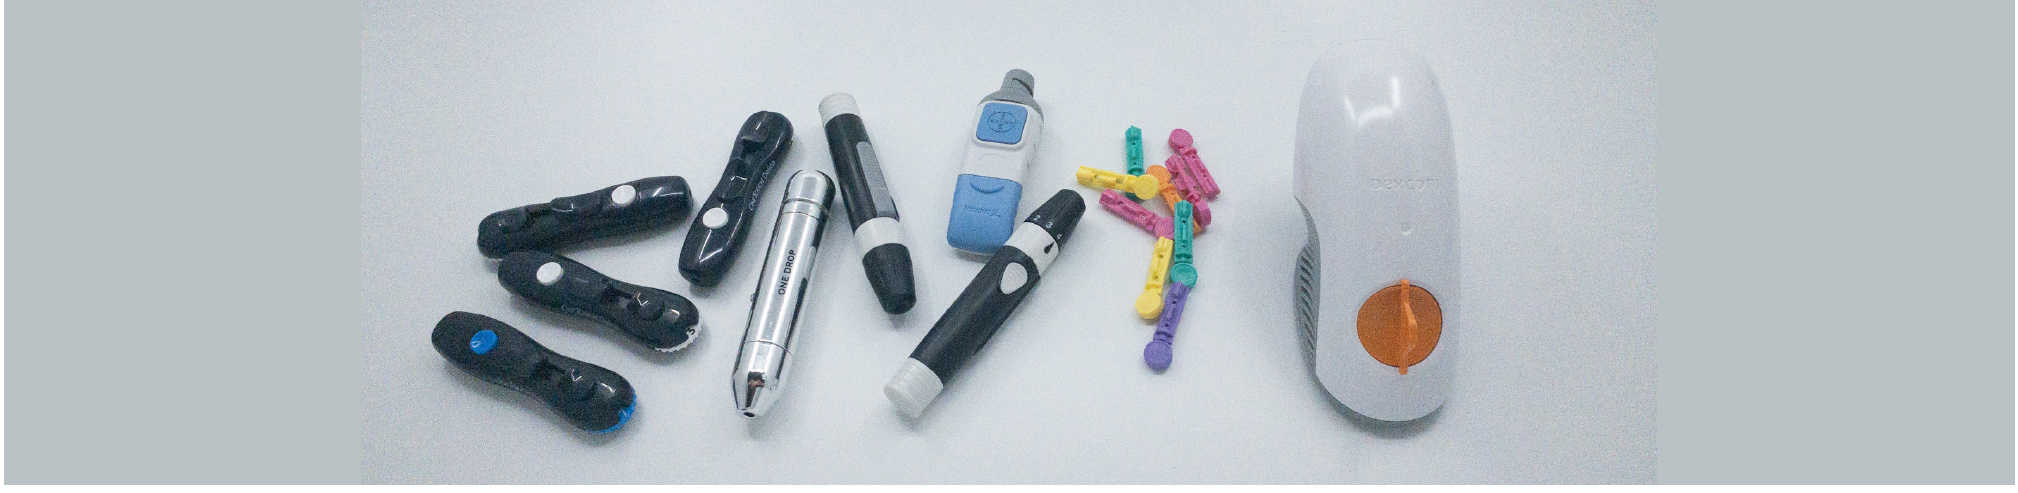 Making the jump from finger pricks to CGM